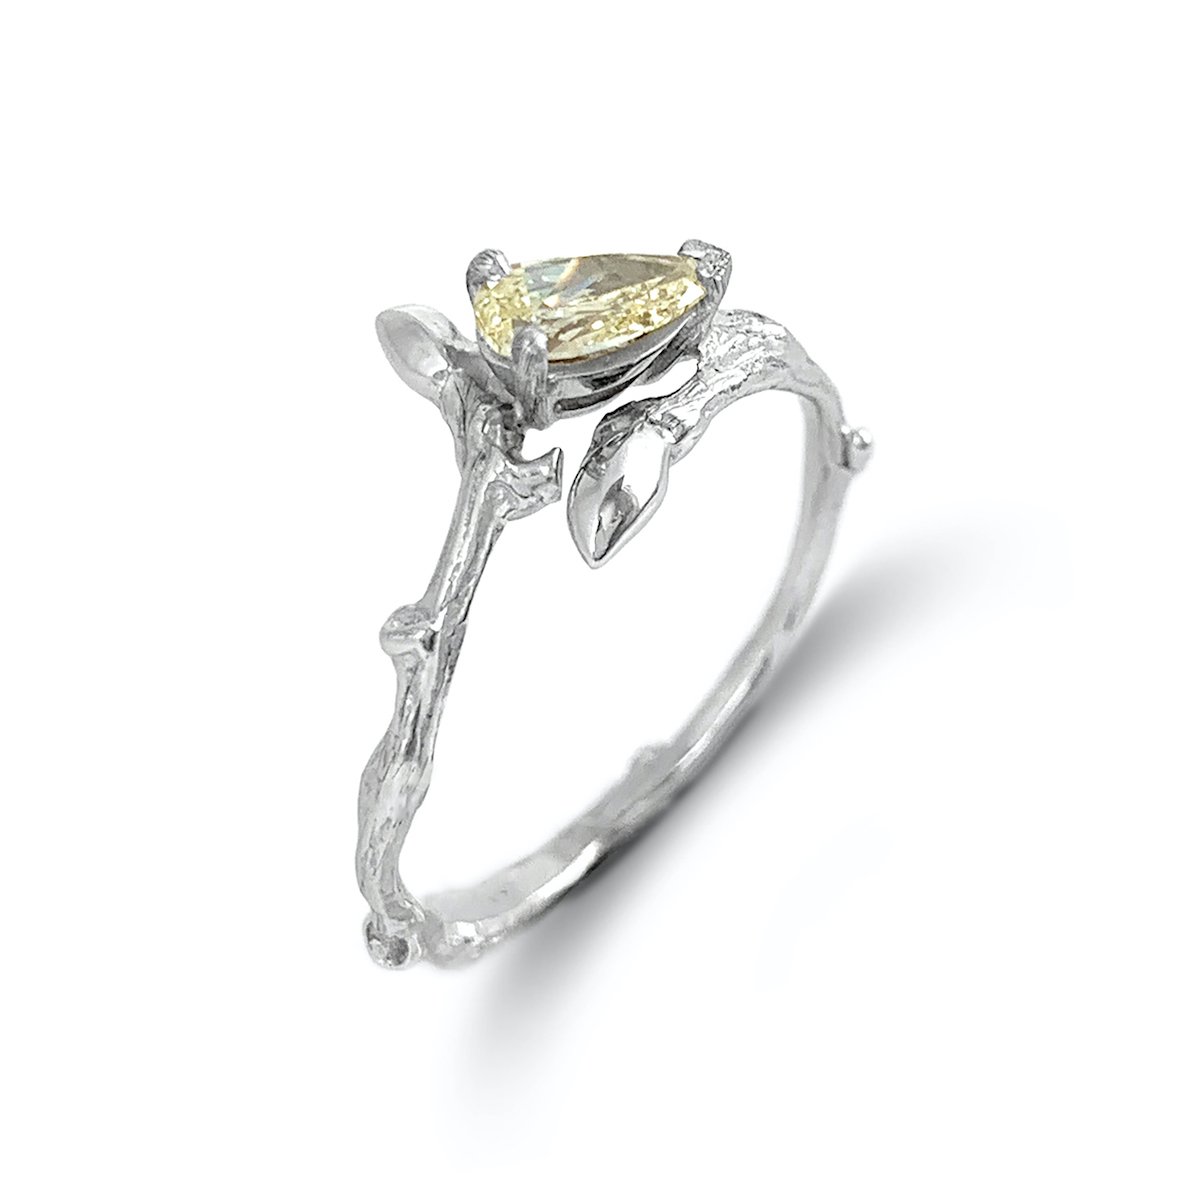 Brandts Jewellery willow twig ring with canary yellow diamond - Ayshe Brandts.jpg